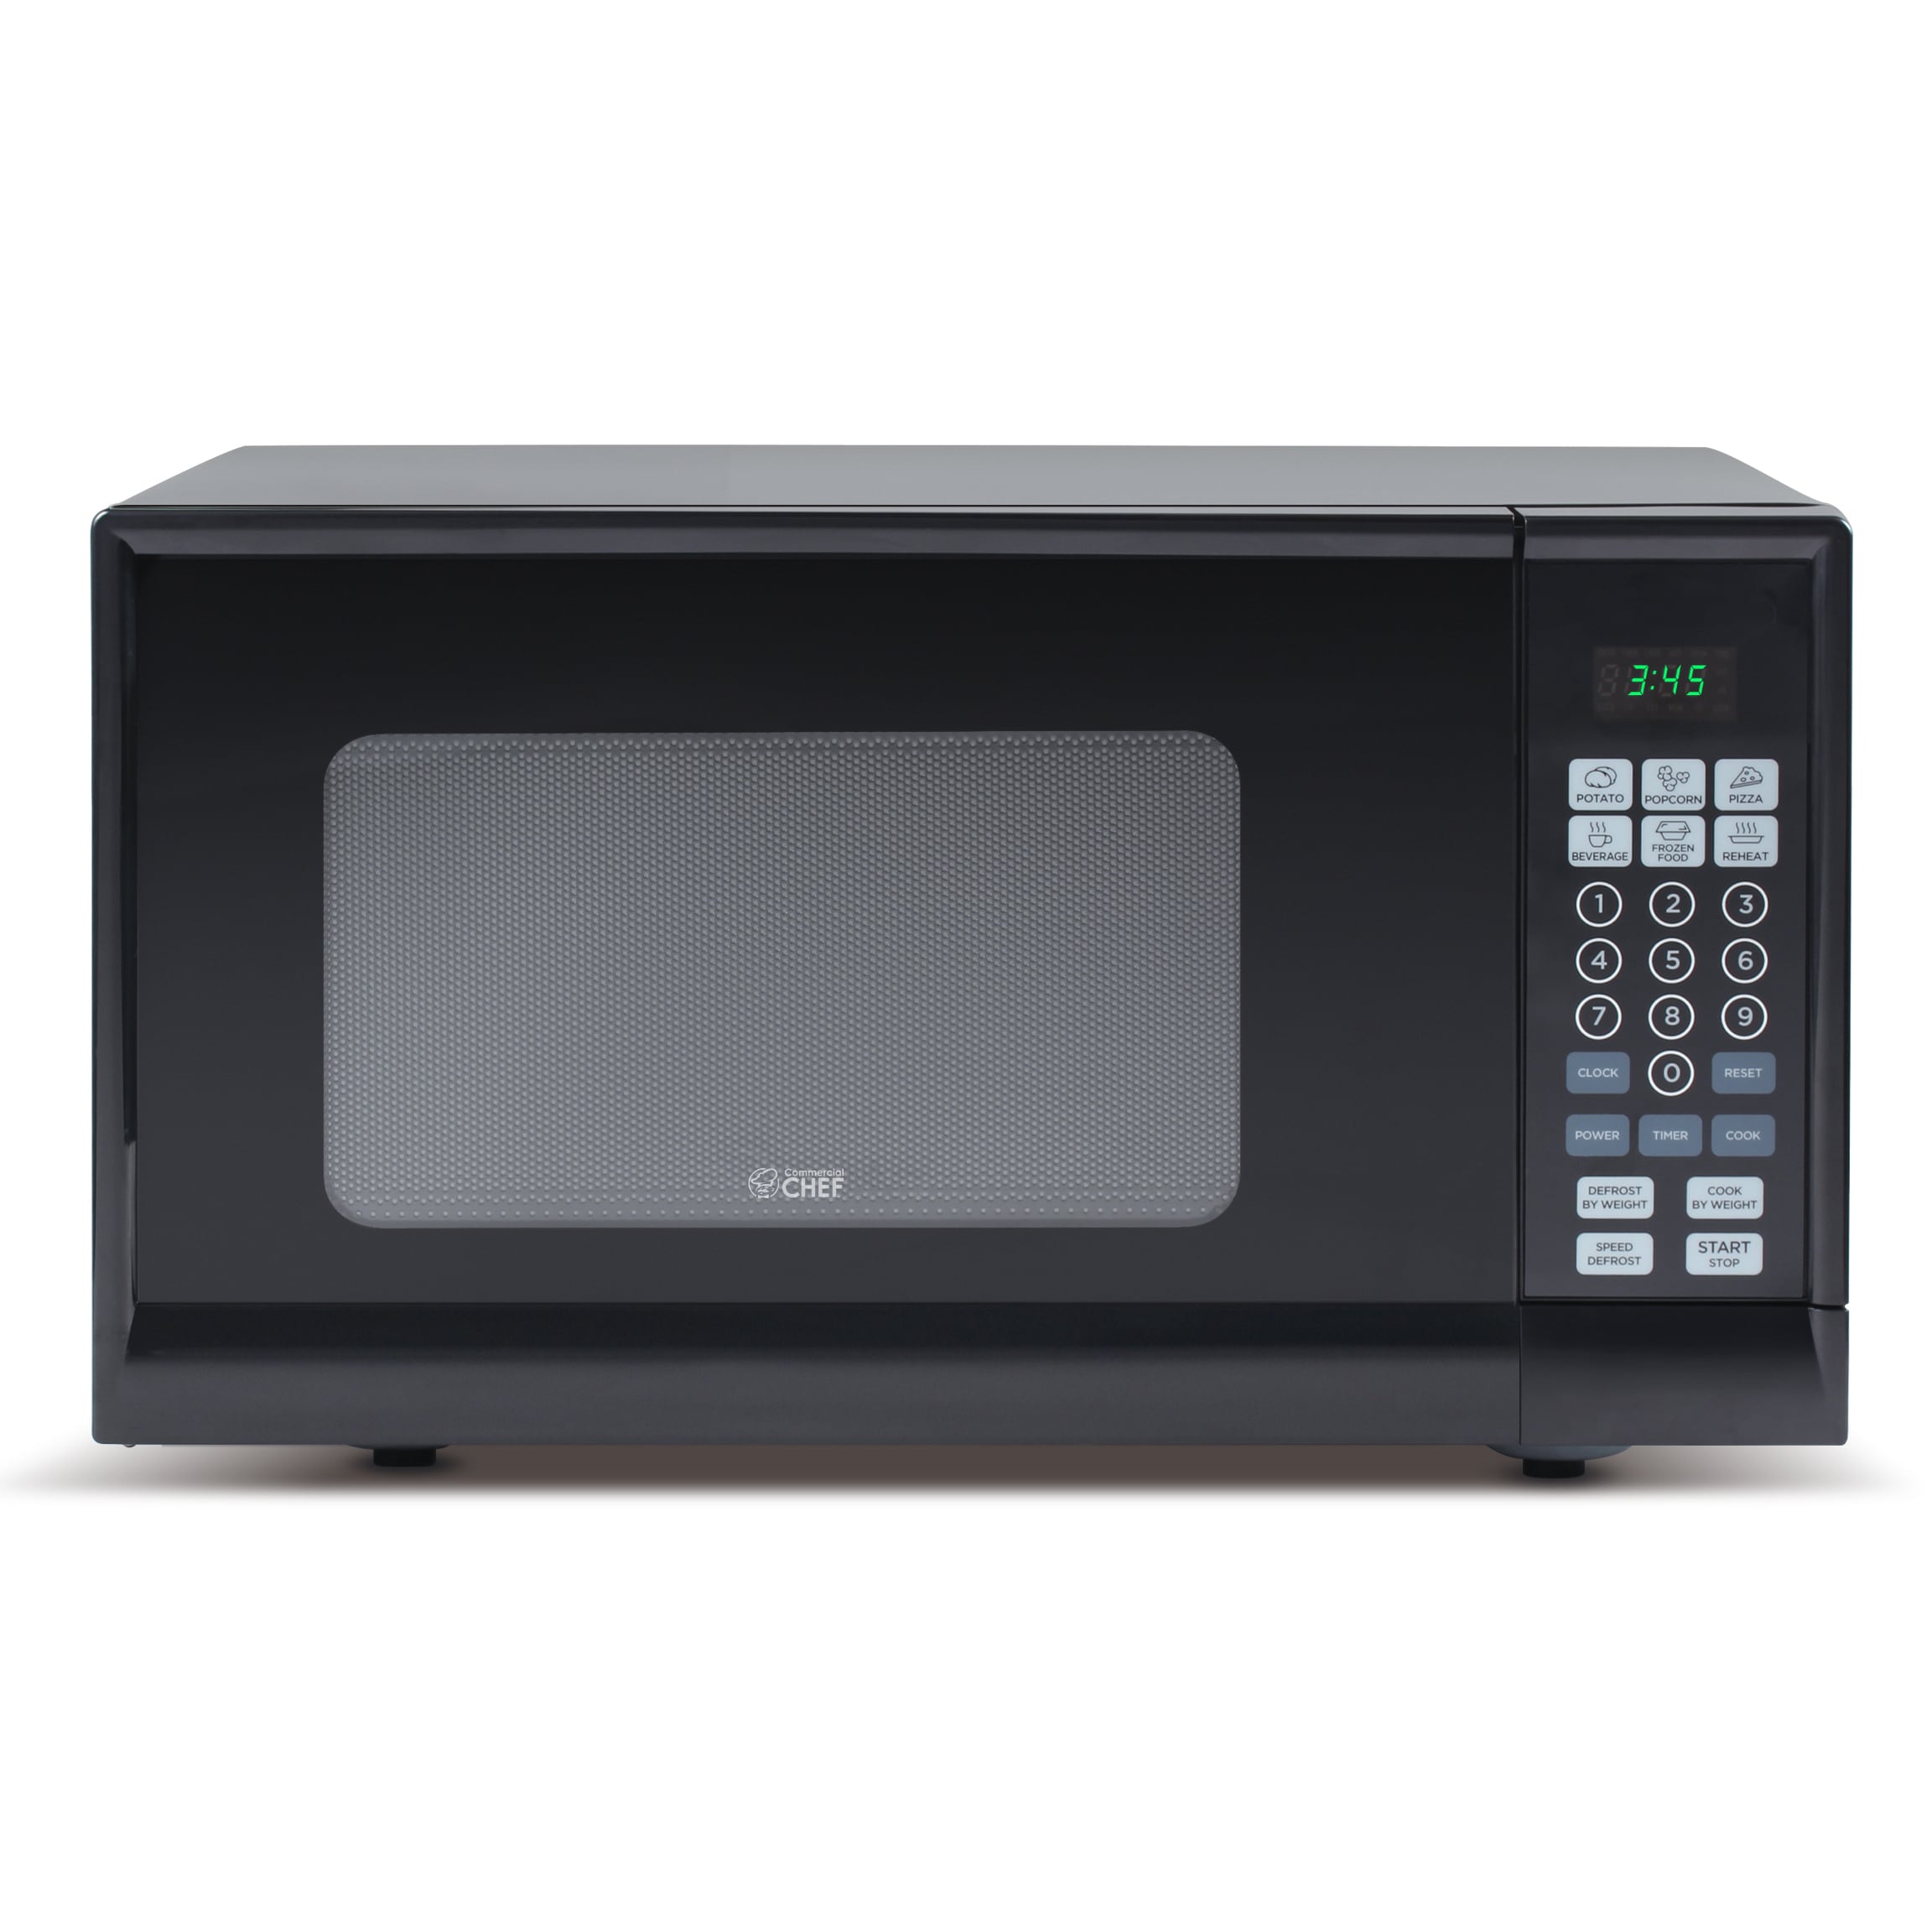 Hamilton Beach 0.9 Cu ft Countertop Microwave Oven, 900 Watts, Stainless  Steel, New 